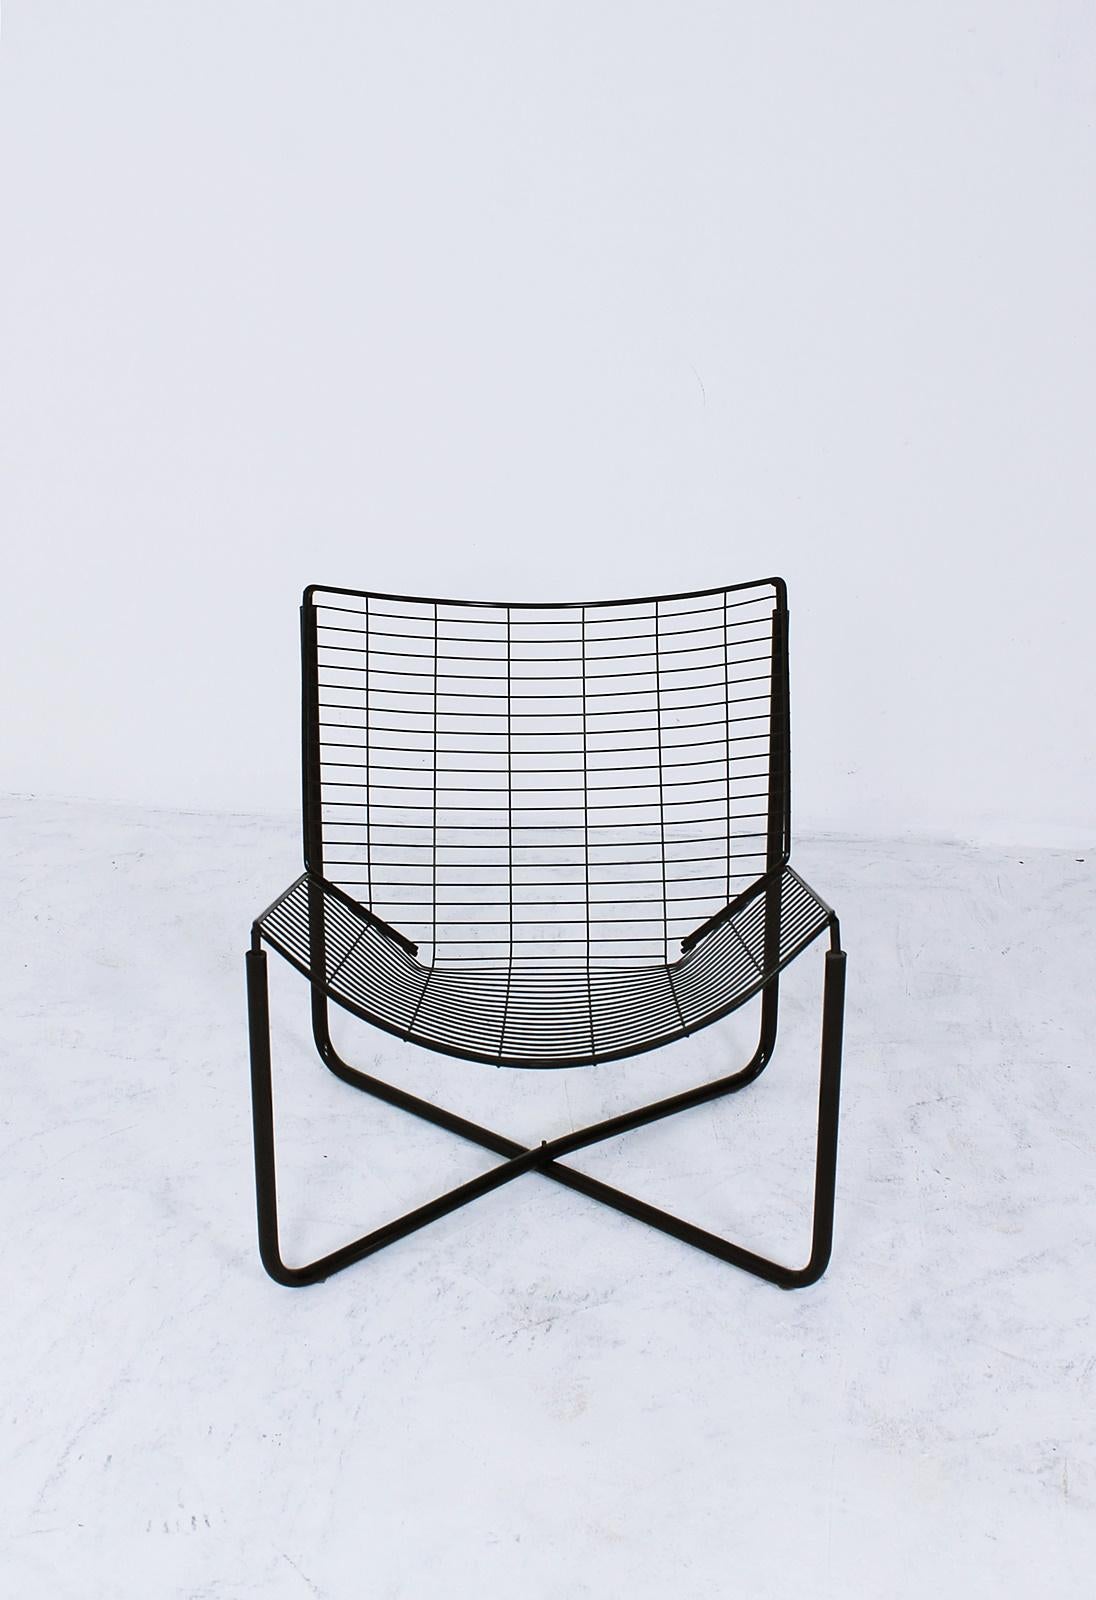 This lounge chair or easy chair was designed by Niels Gammelgaard for Ikea, and produced in 1983.
The frame is made of black lacquered metal.
Vintage Ikea is now becoming very collectible and these chairs have a fantastic look.




    